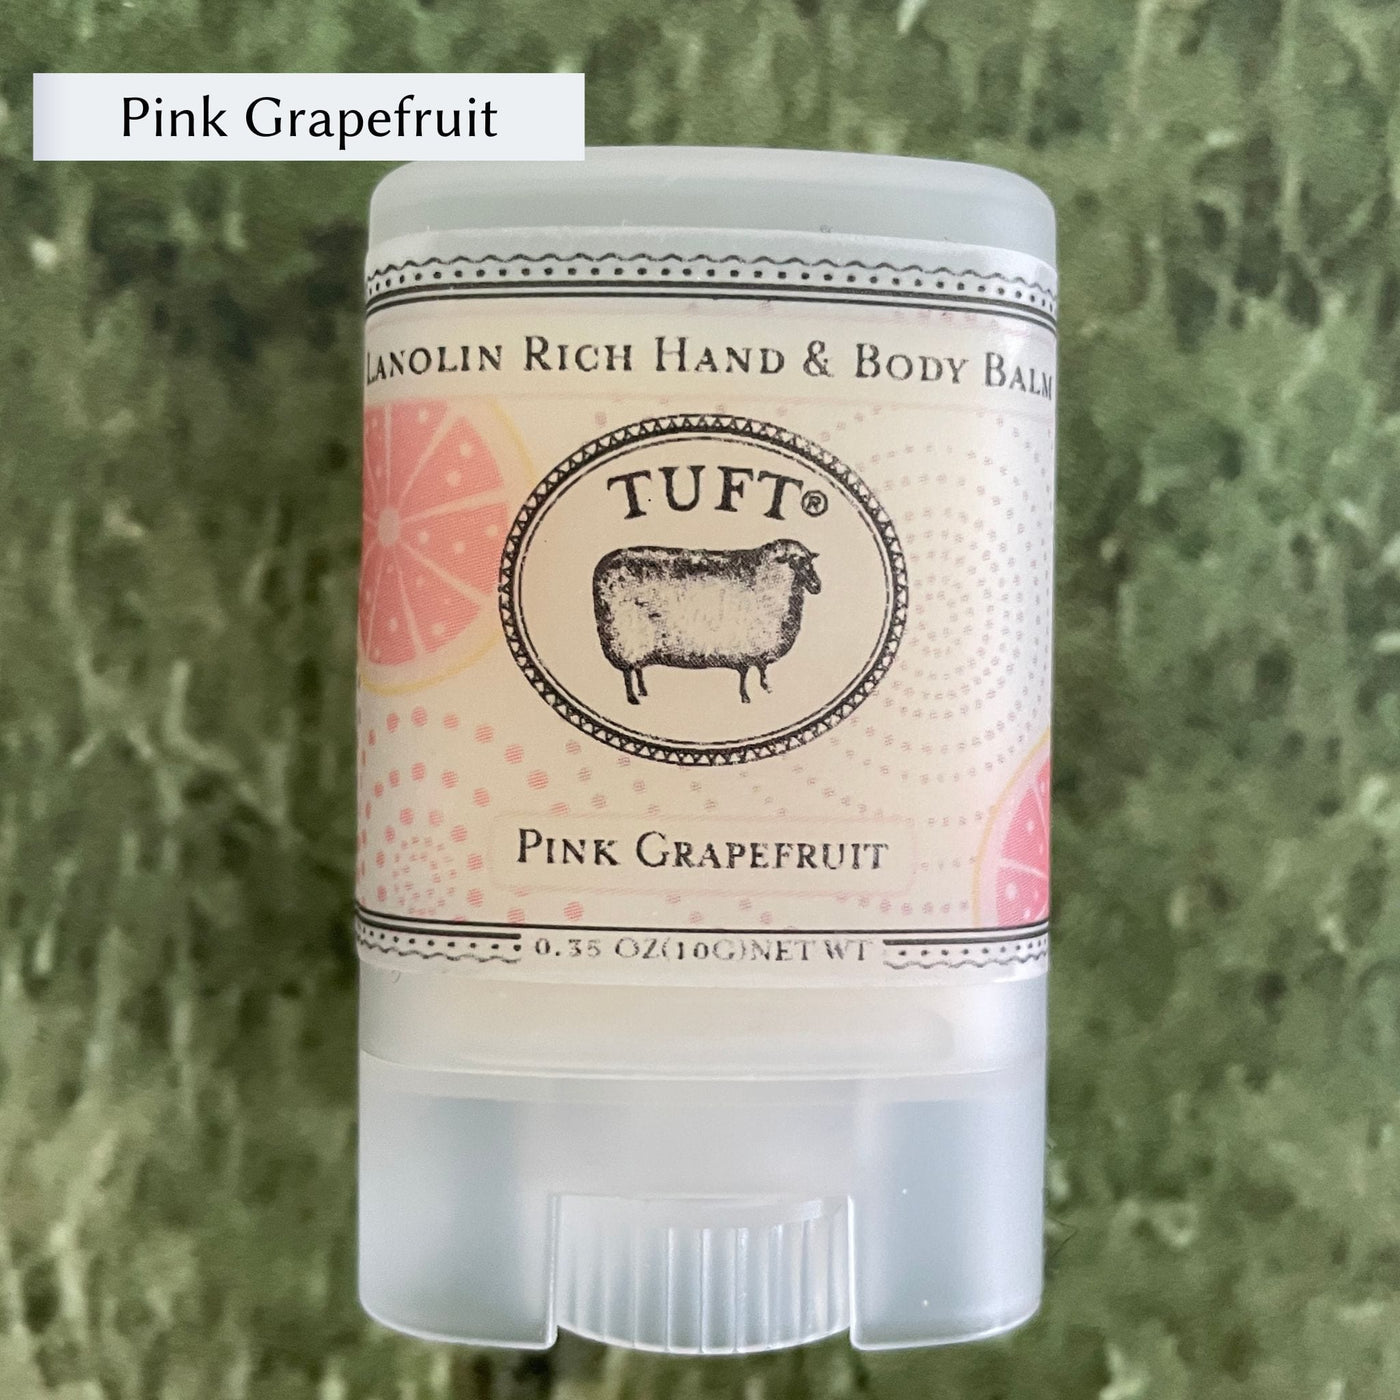 Container of Tufts Woolen Hand & Body Balm in scent called Pink Grapefruit. 